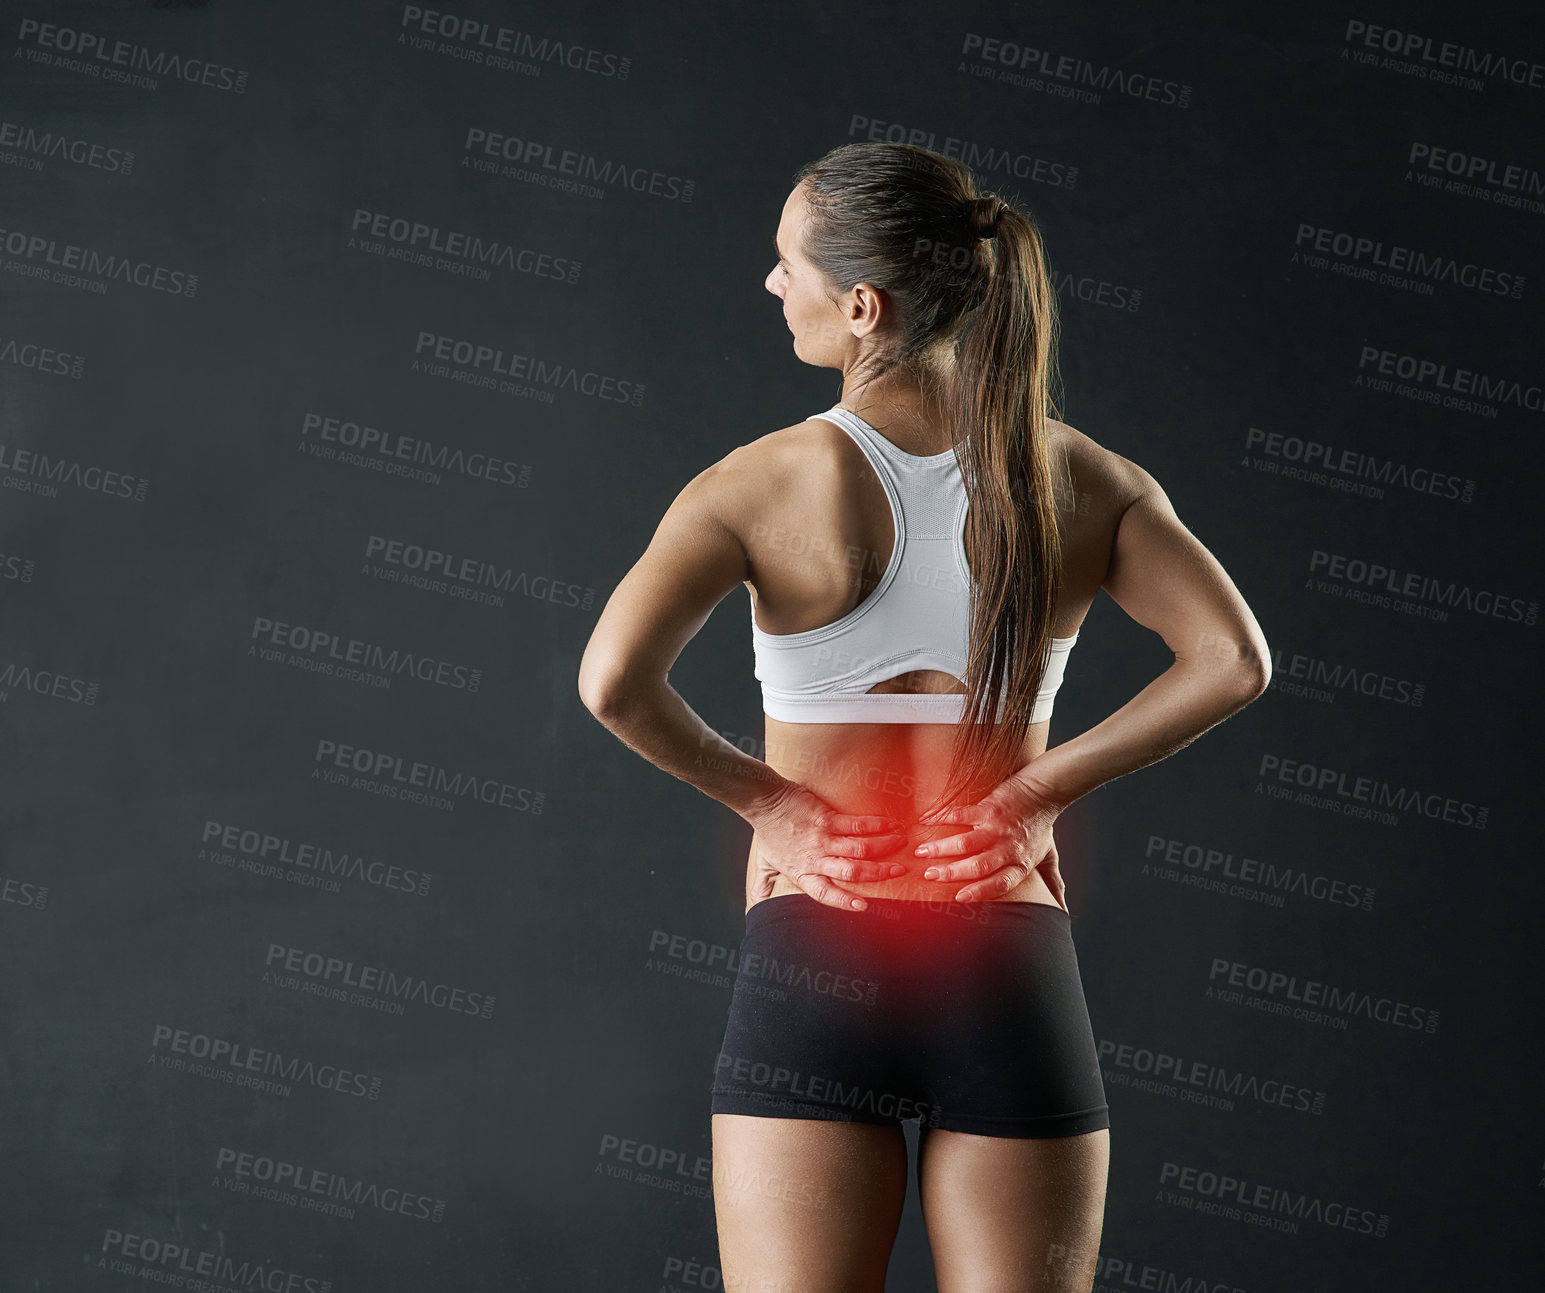 Buy stock photo Studio shot of a sporty young woman holding her lower back in pain against a dark background